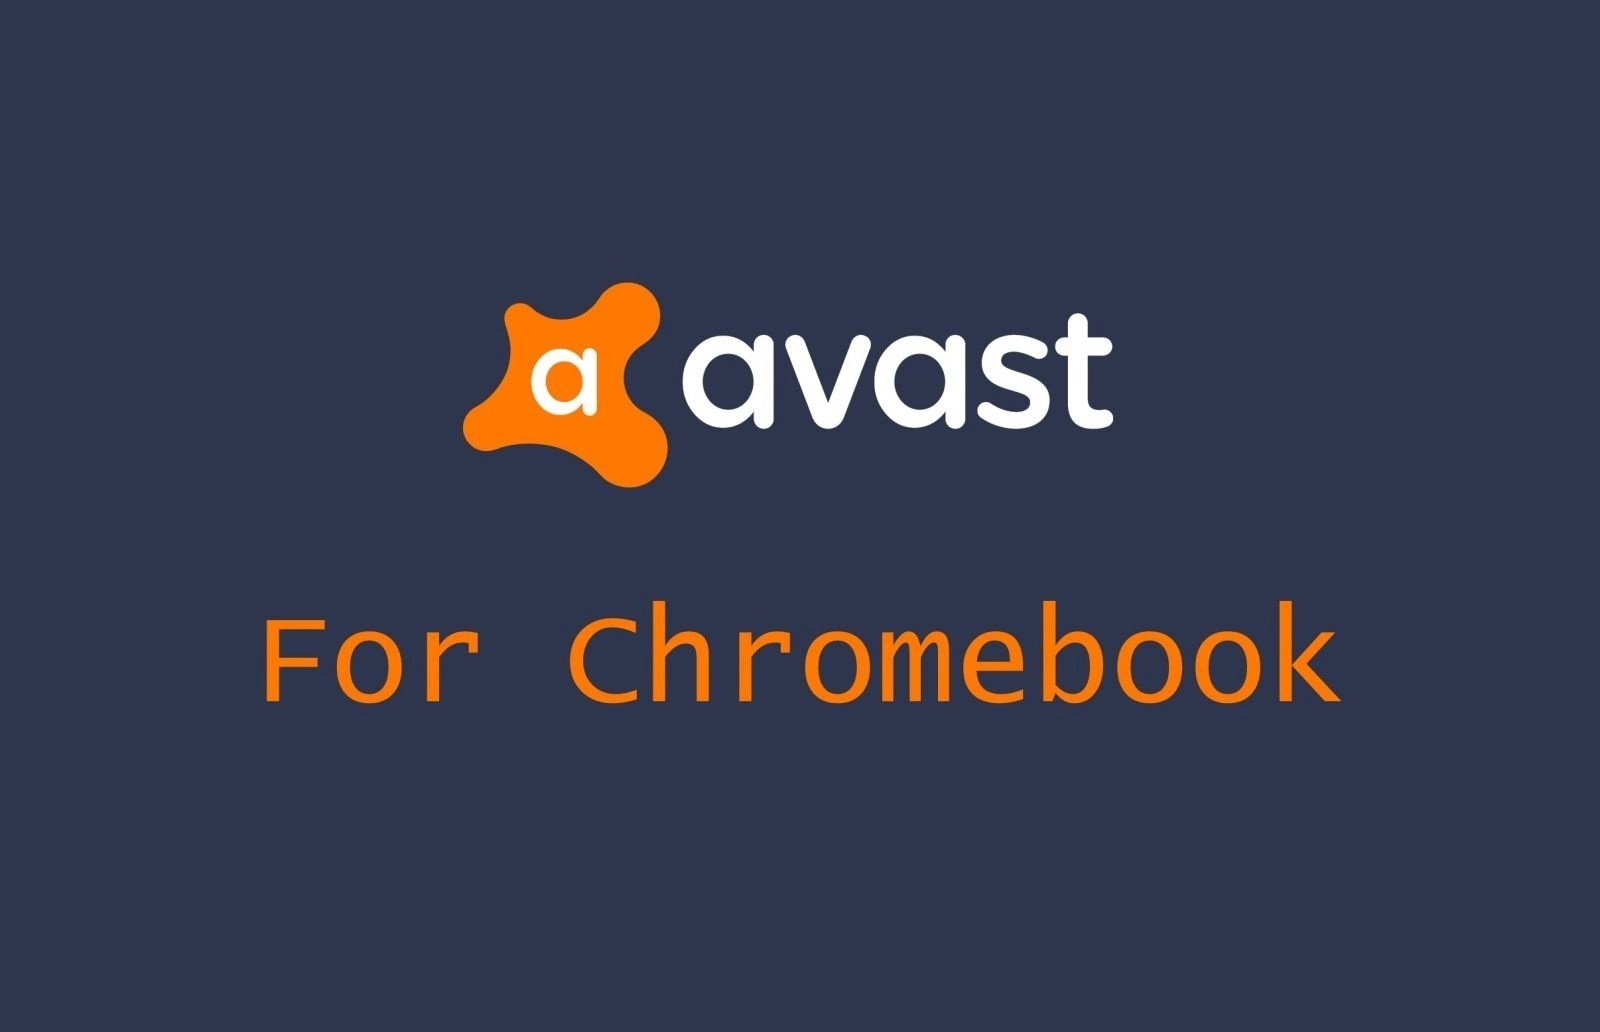 How to Install and Use Avast on Chromebook